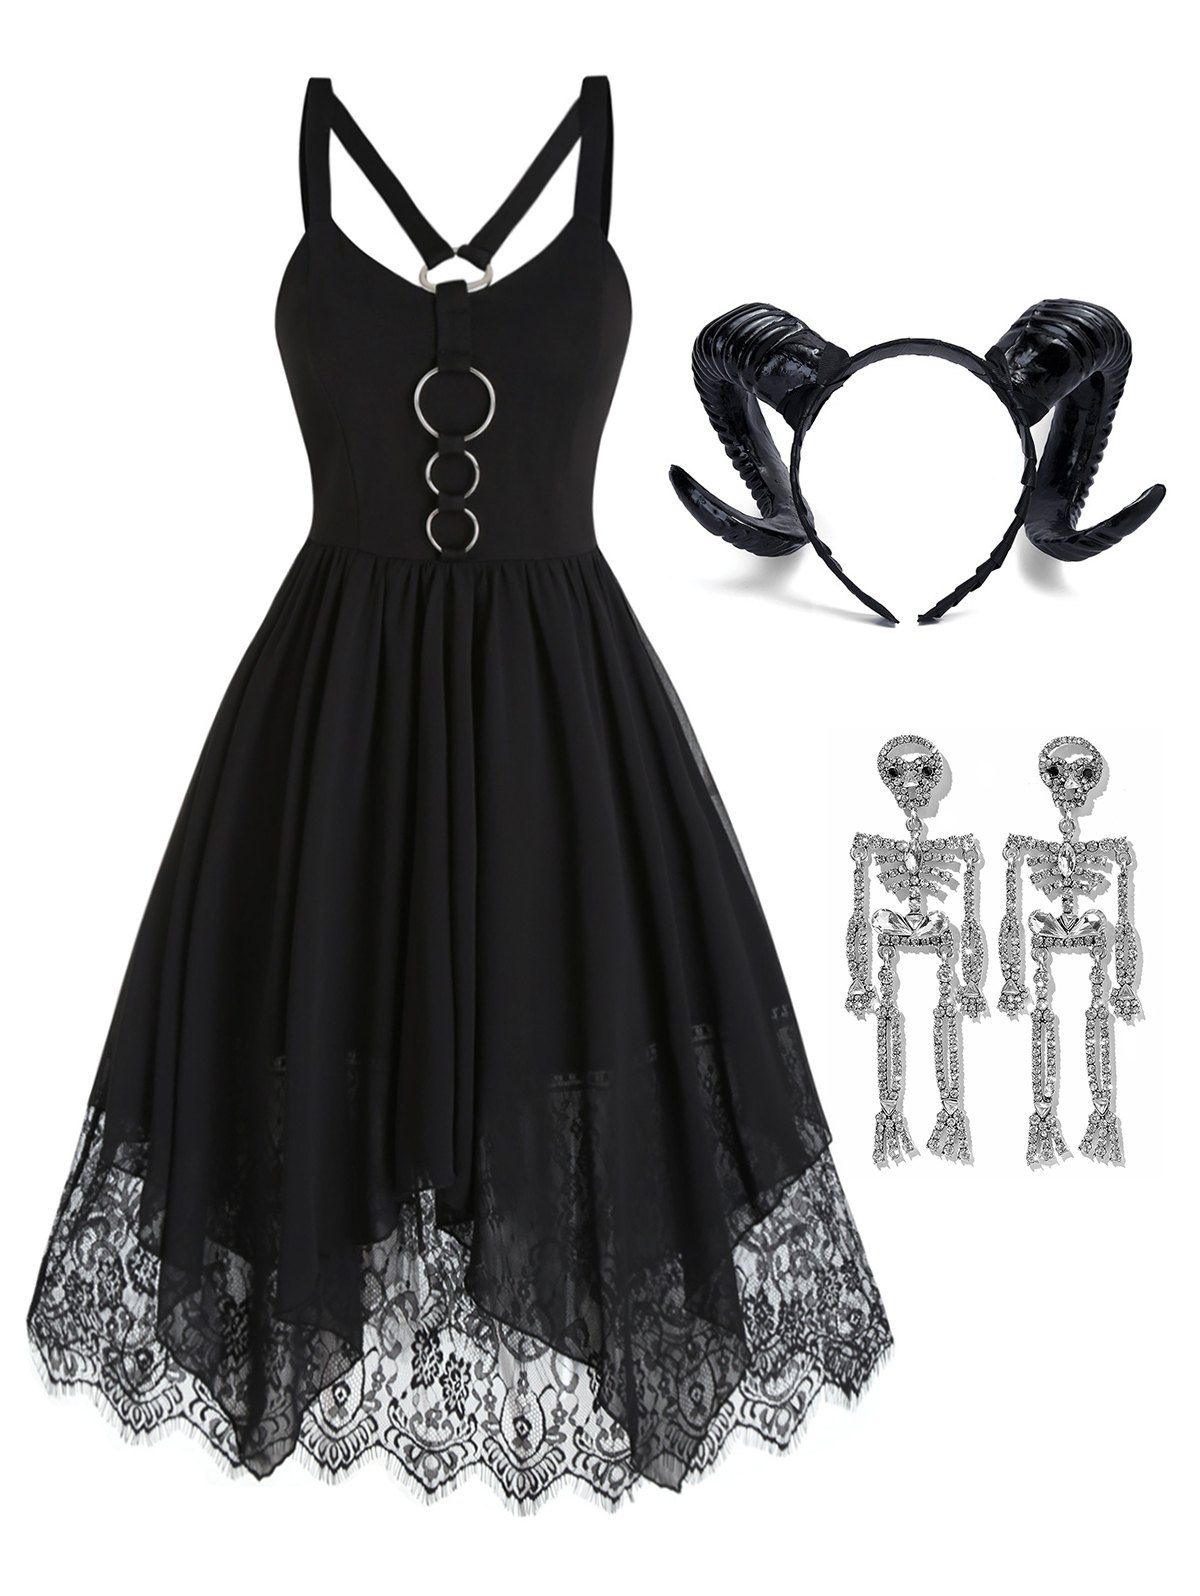 Floral Lace Chiffon O Rings Asymmetric Dress And Cow Horns Hairband Skeleton Earrings Halloween Outfit - BLACK S